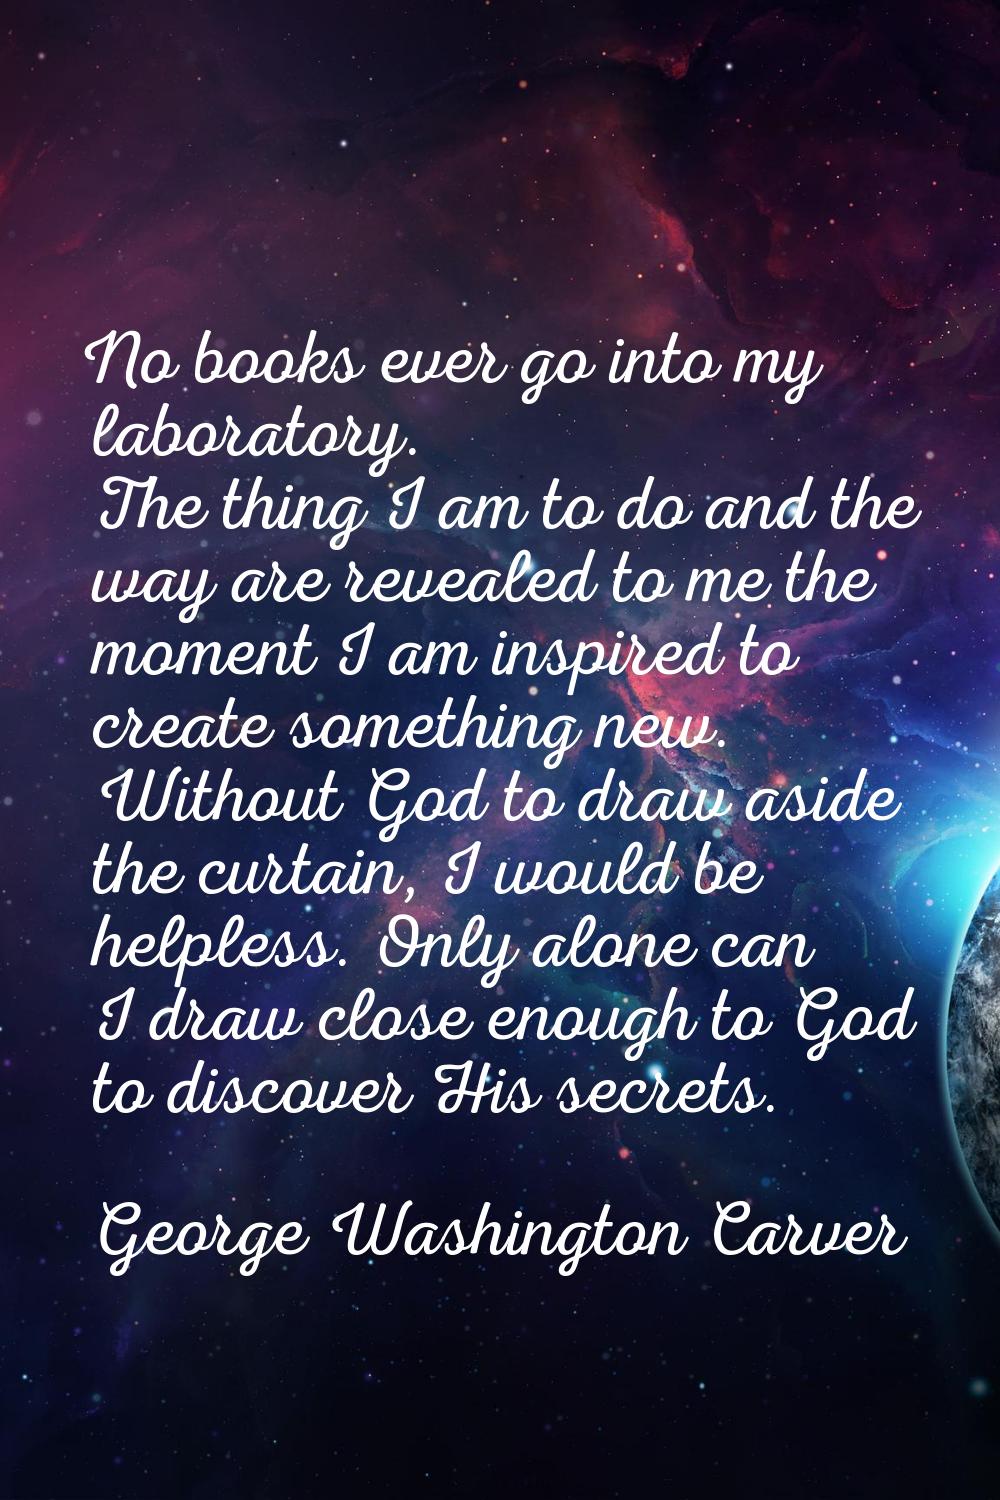 No books ever go into my laboratory. The thing I am to do and the way are revealed to me the moment